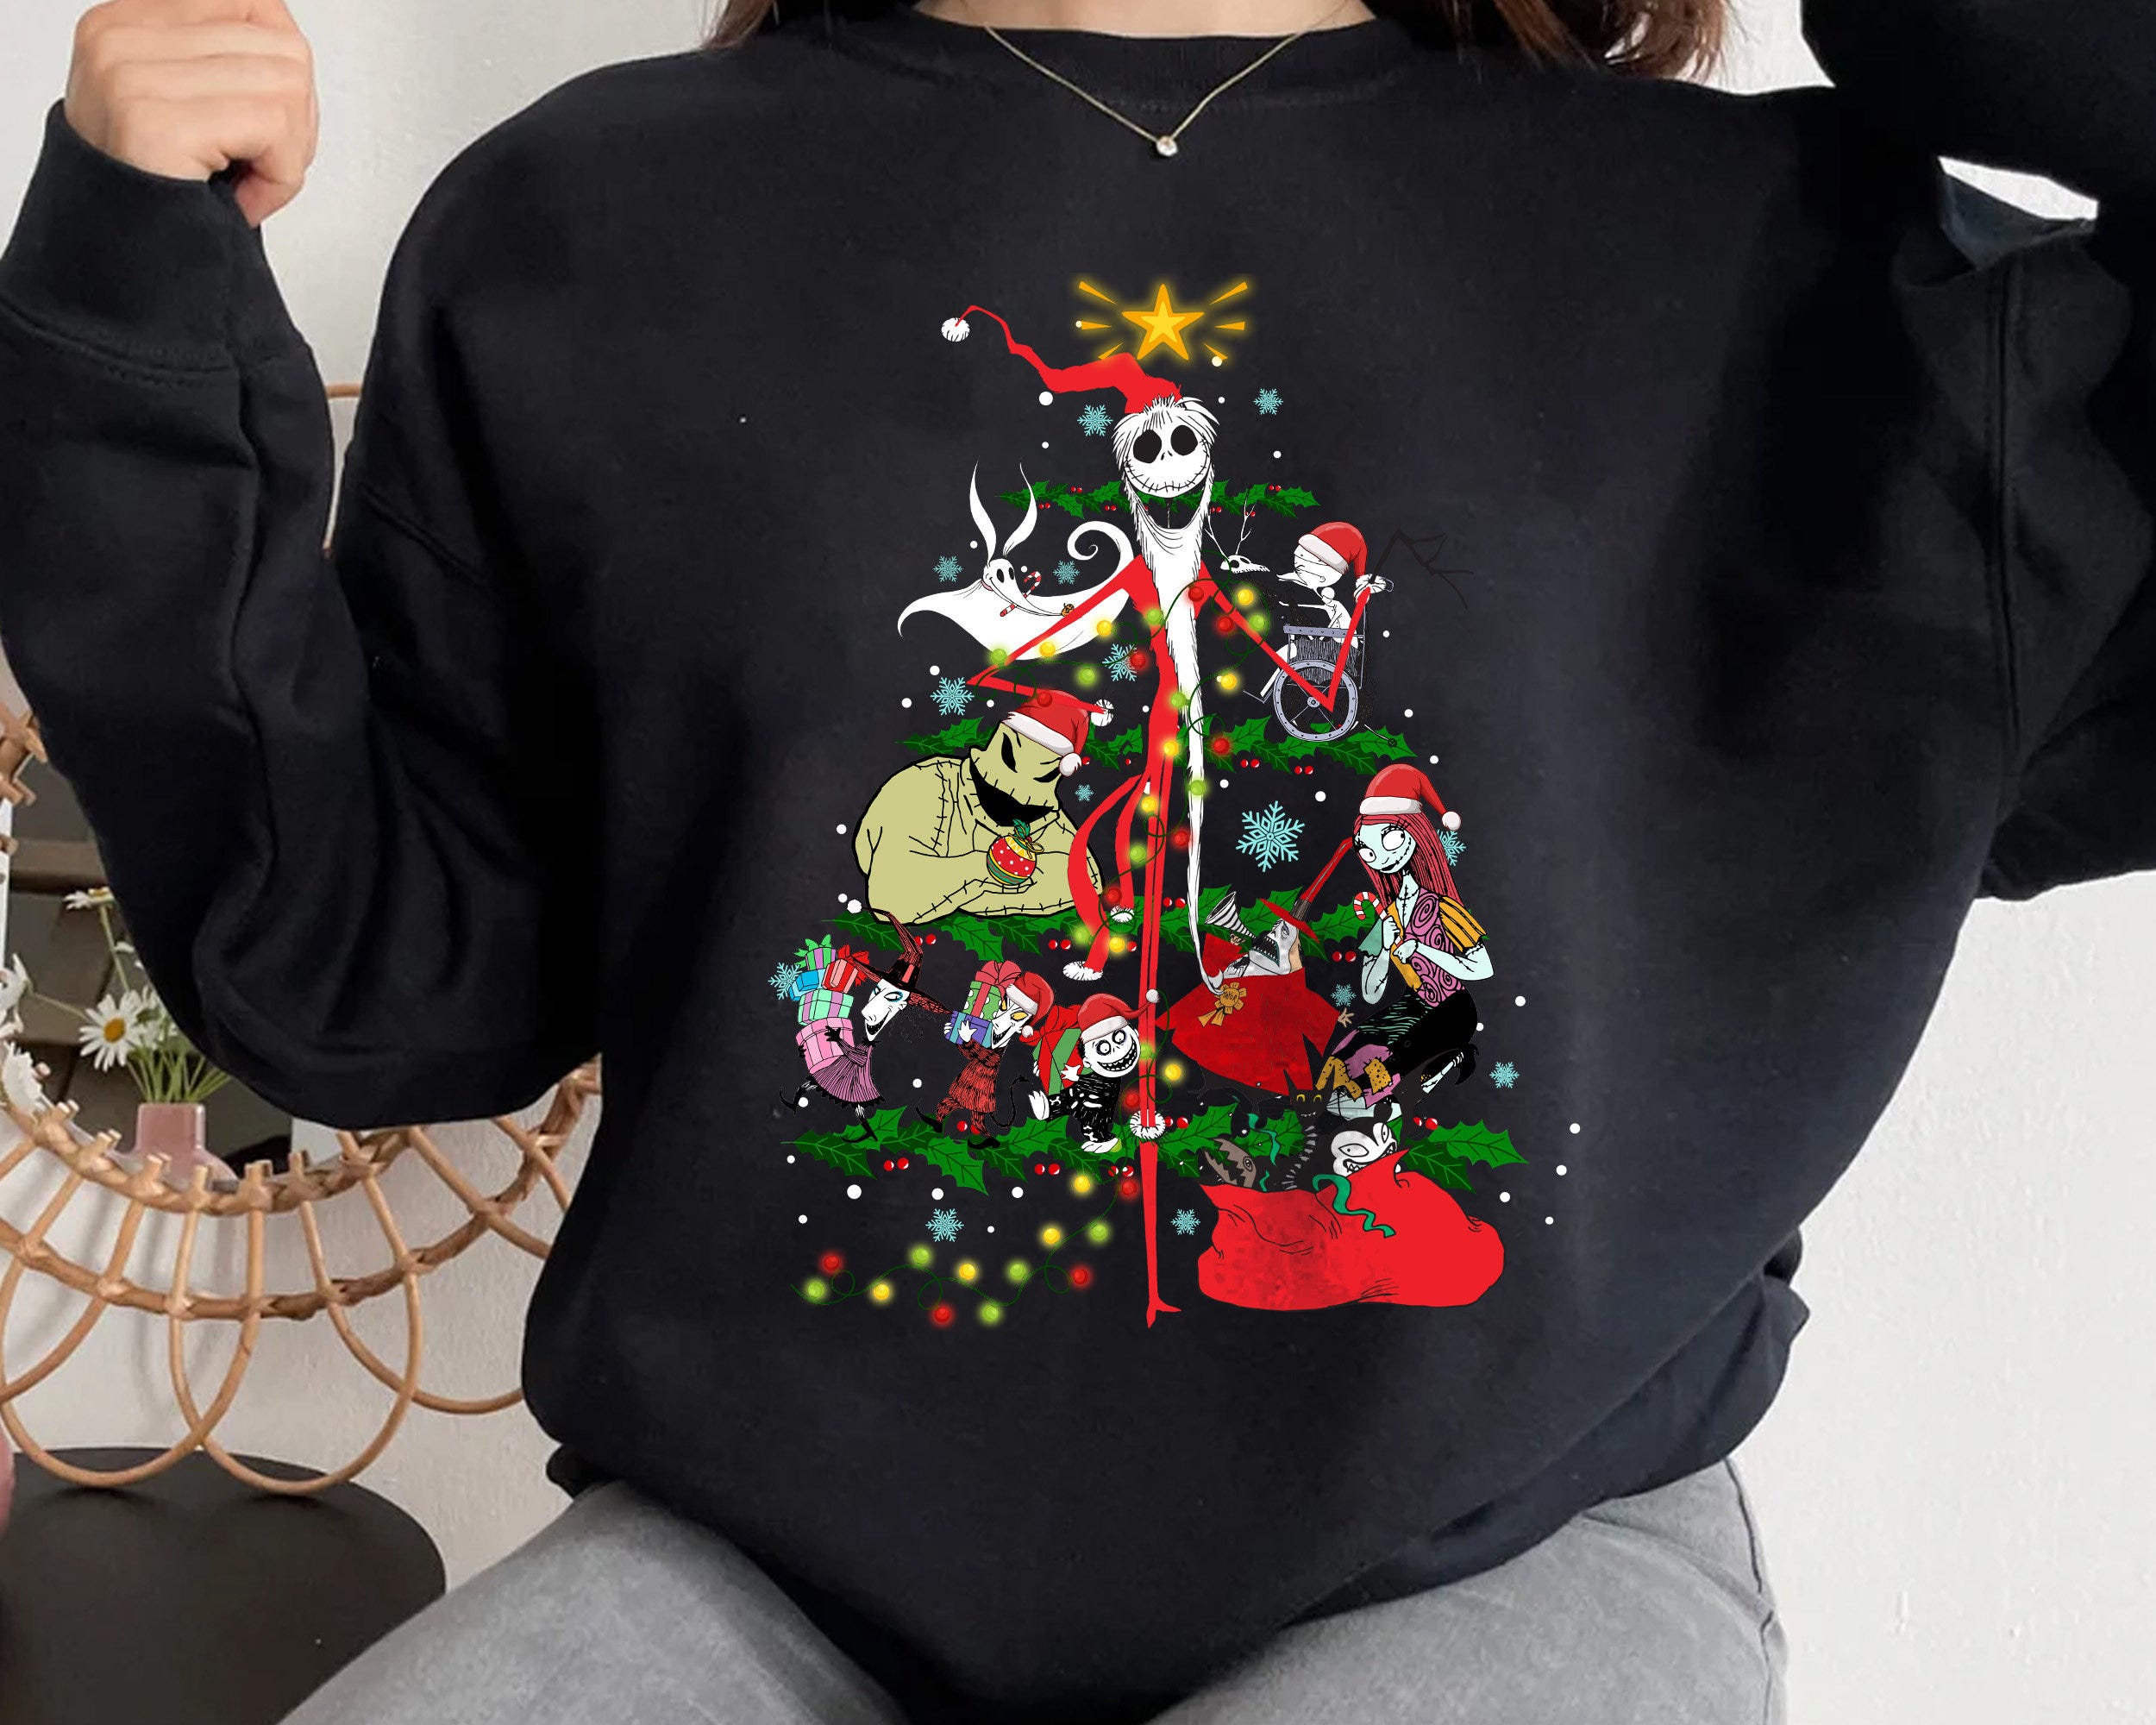 Nightmare before Christmas Squad Tree T-Shirt, Jack Sally Oogie Boogie, Mickey Christmas Party Matching Tee, Disney Disneyland Vacation Gift